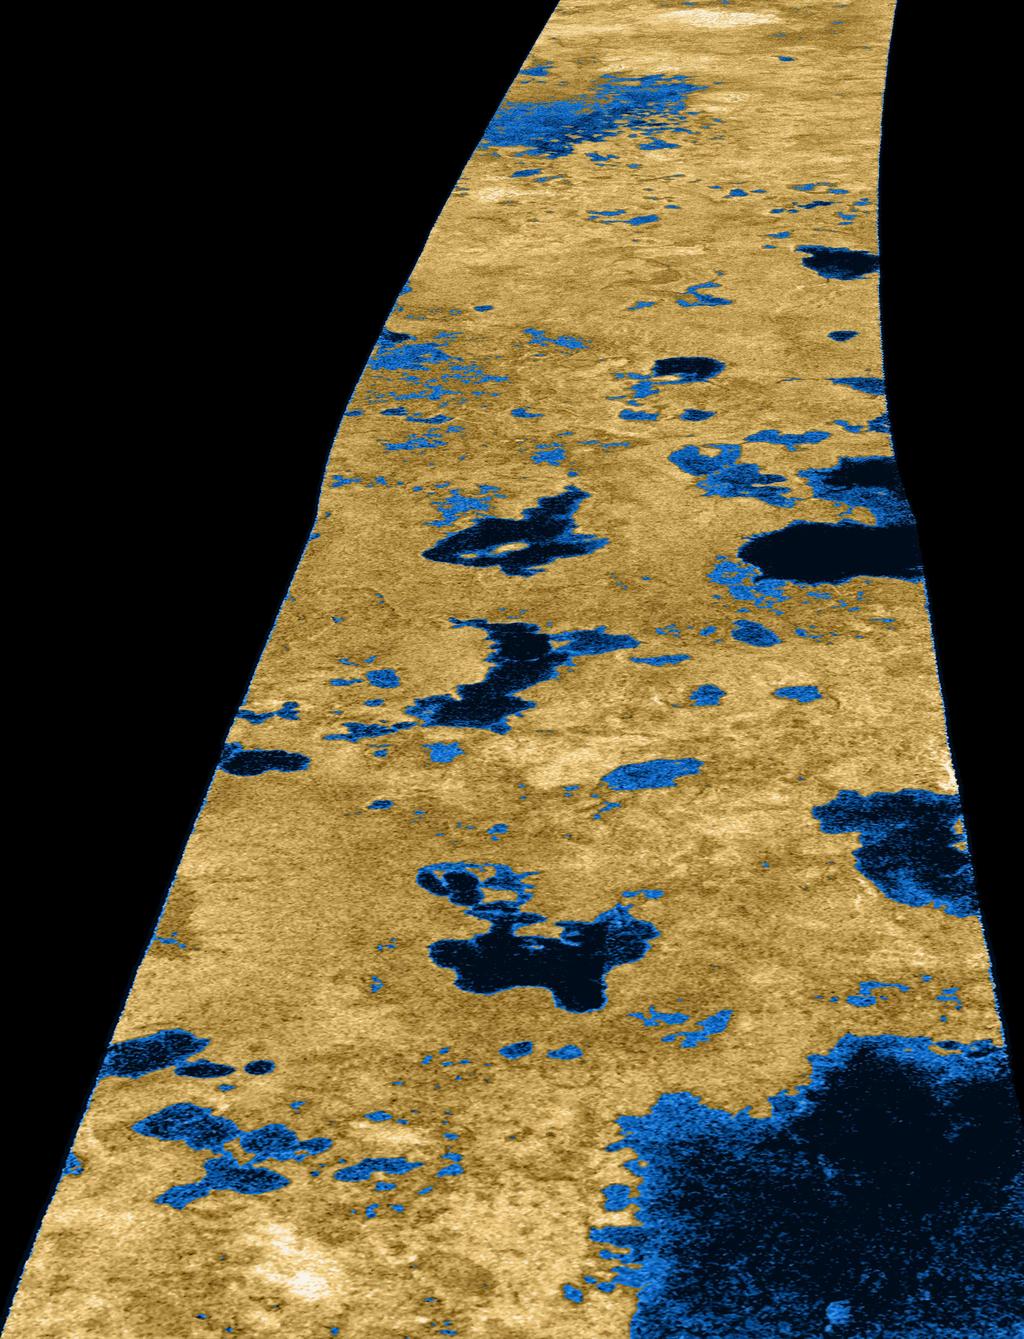 Titan s surface! The surface pressure is comparable to that of the Earth (50% larger)! ps=1.47 x 105 Pa!